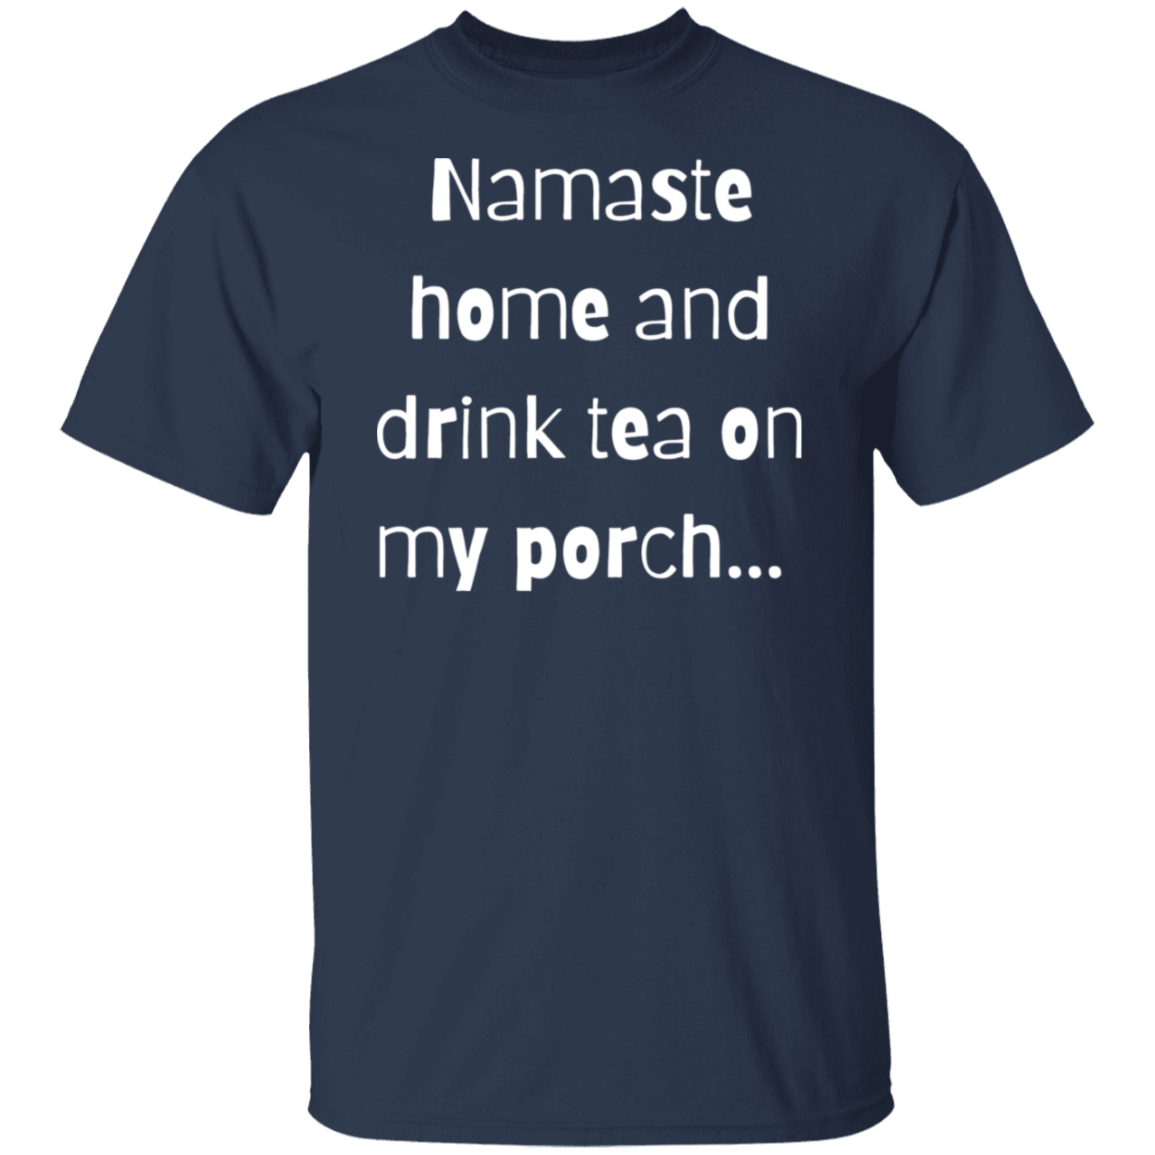 Namaste home and drink tea on my porch T-Shirt